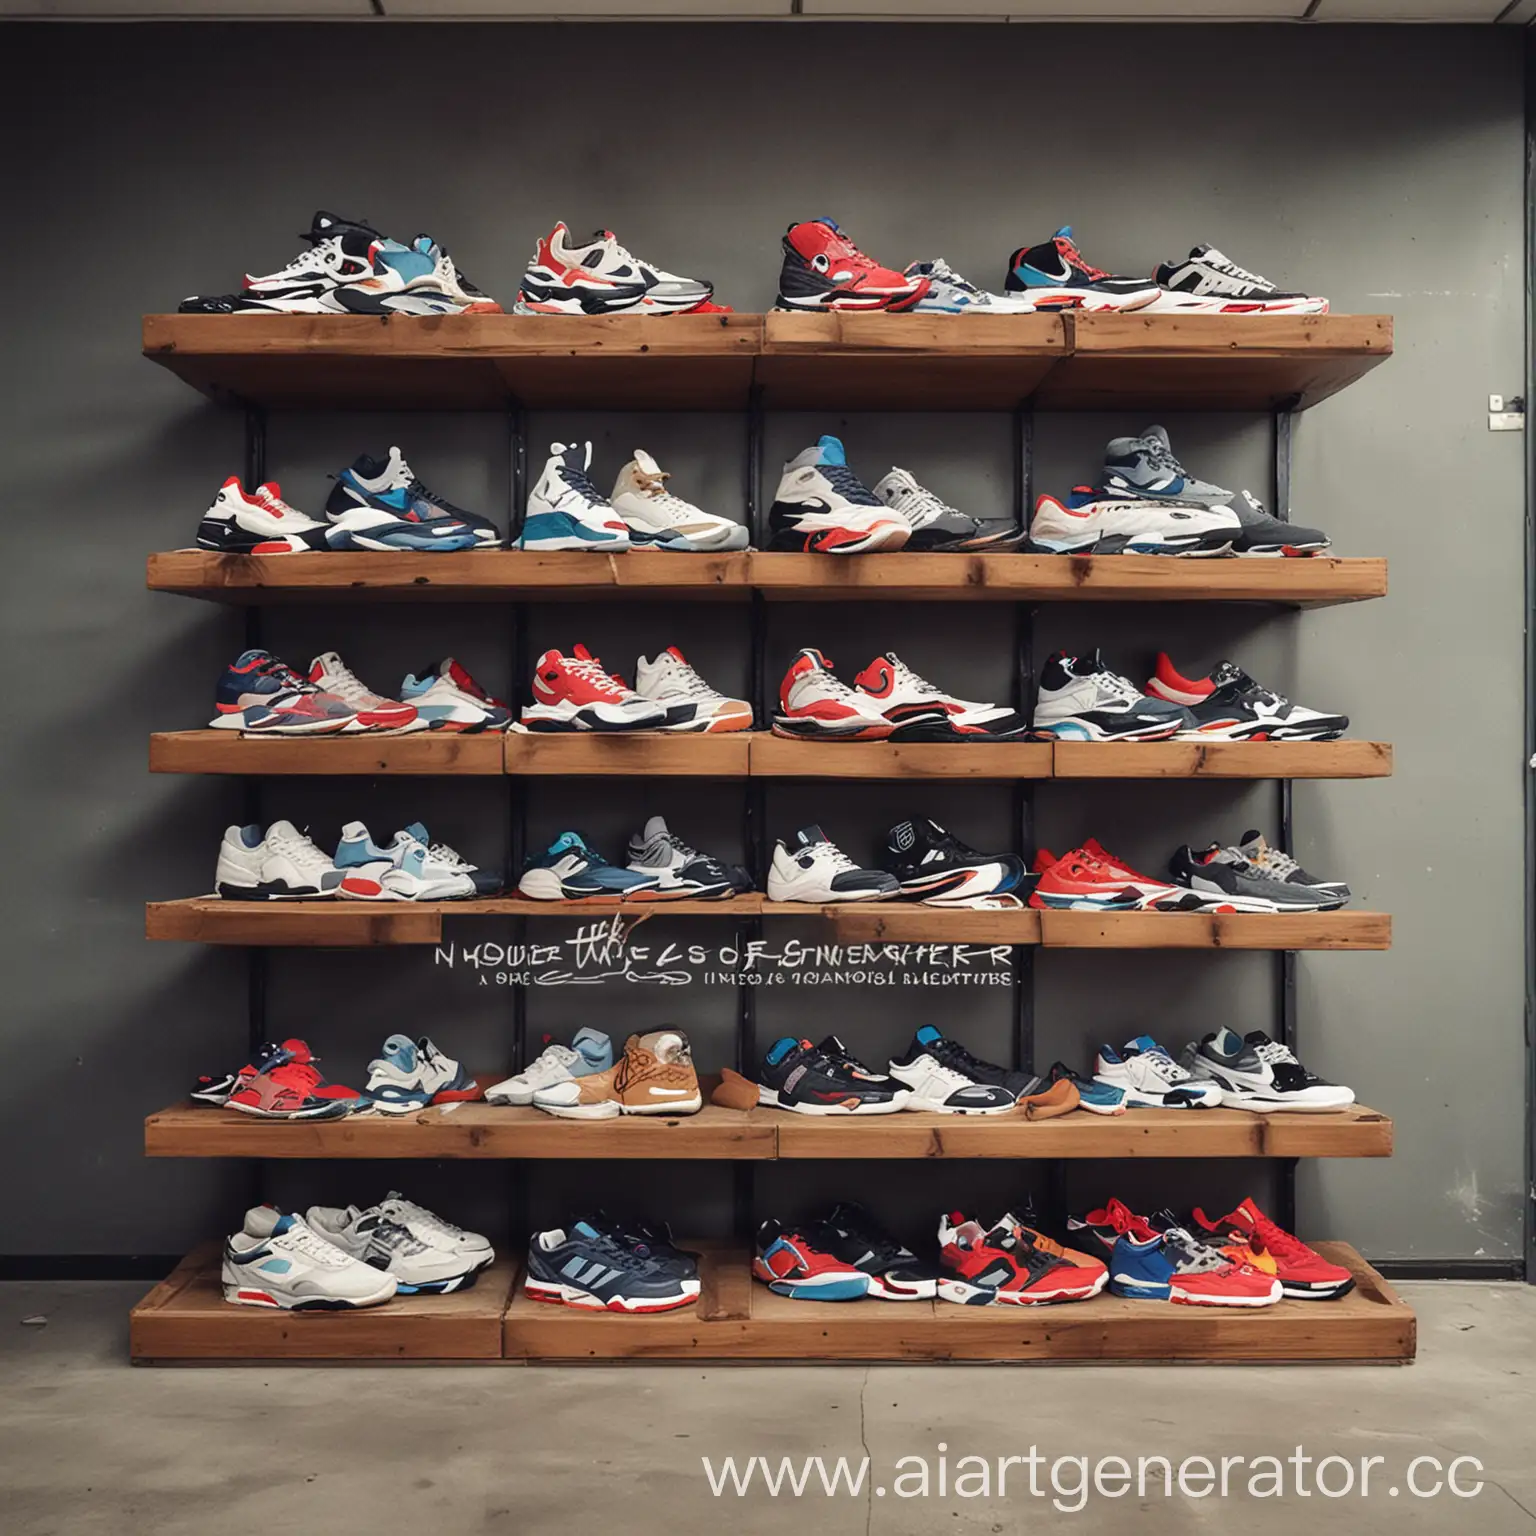 The House of sneakers